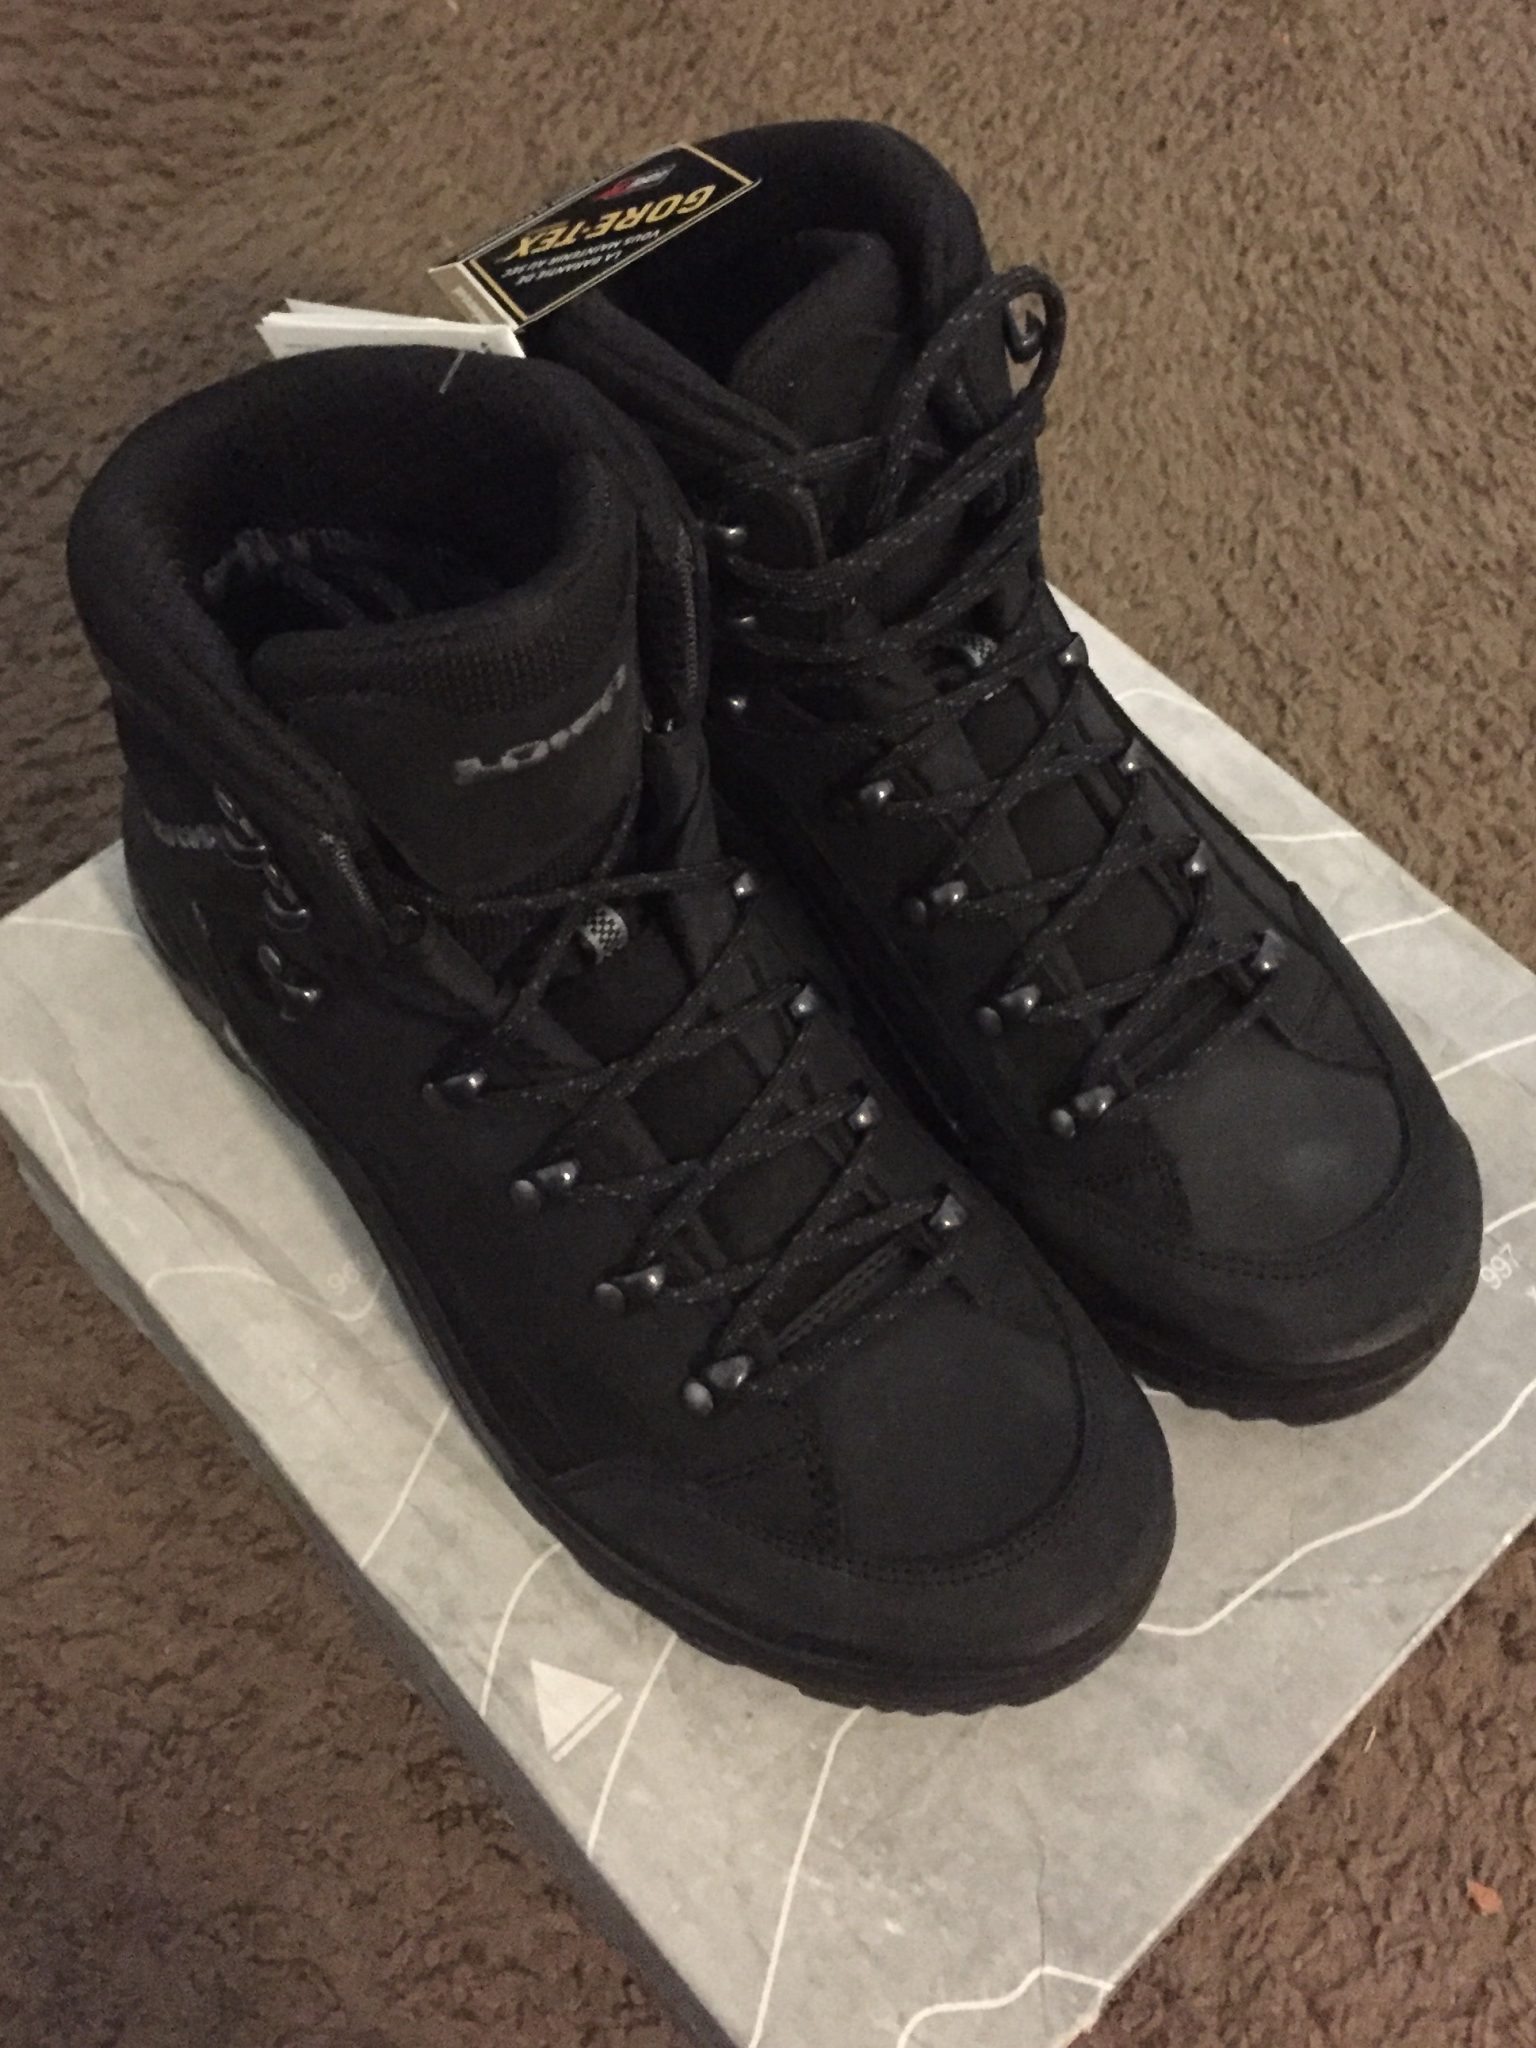 Gear Review: LOWA Renegade boots | SEALgrinderPT